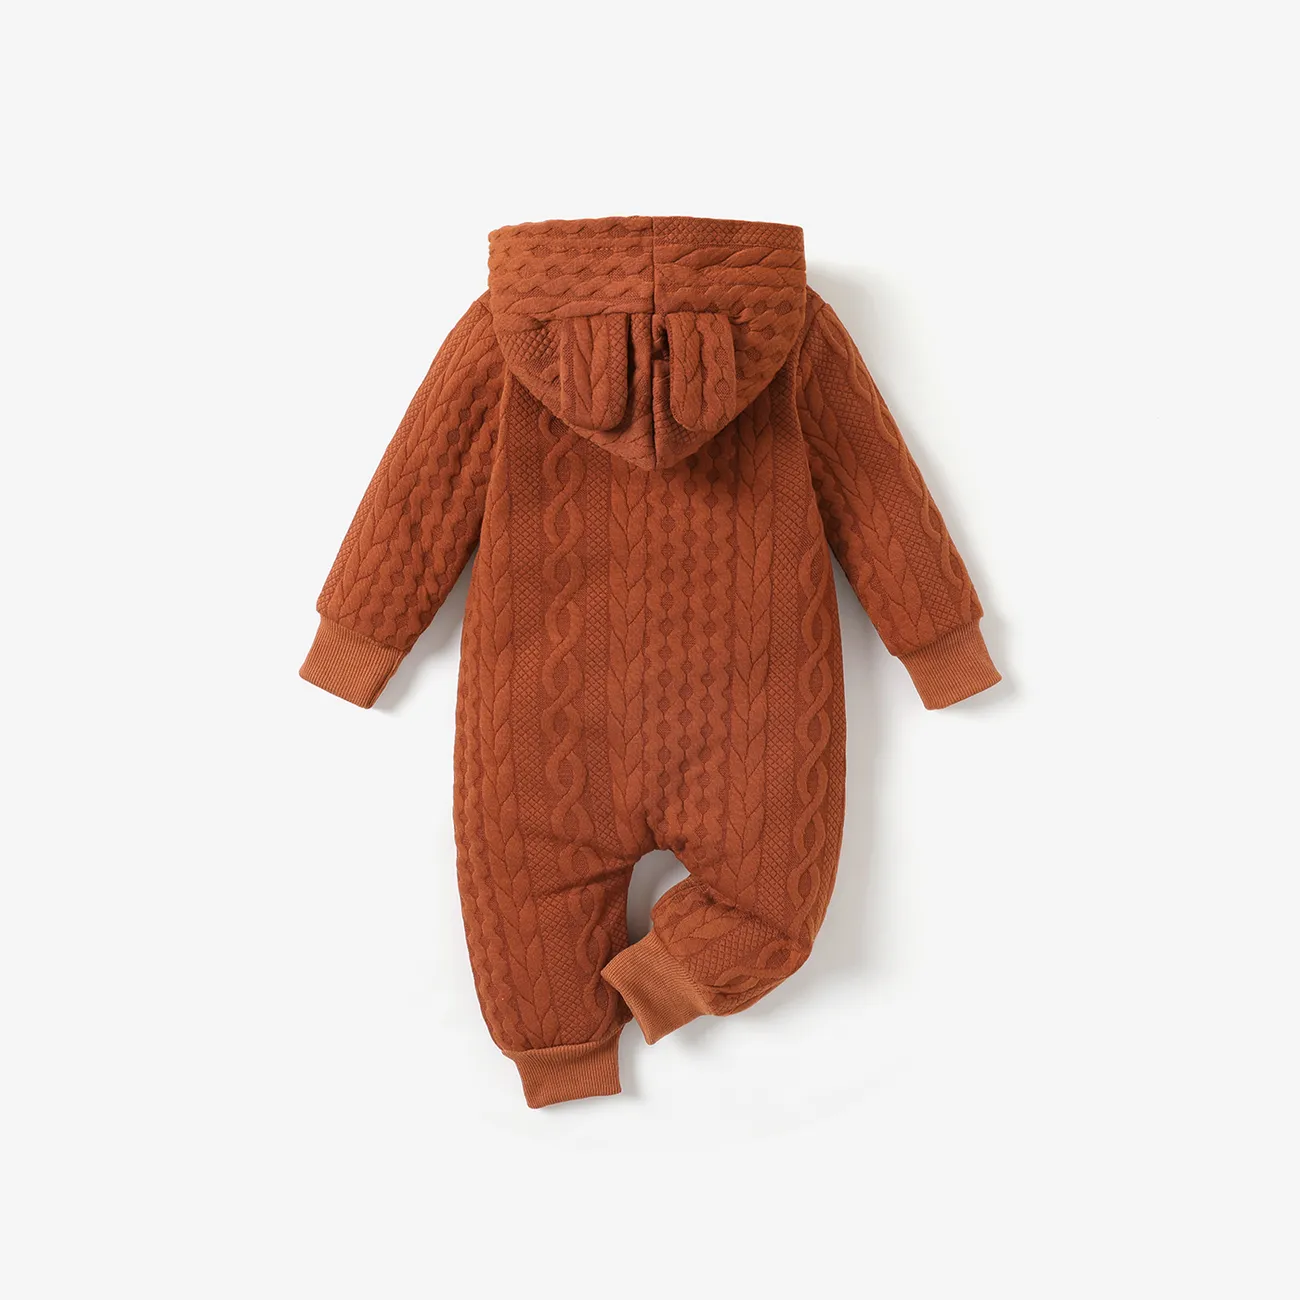 Solid Knitted Hooded Long-sleeve Pink Baby Jumpsuit Brown big image 1